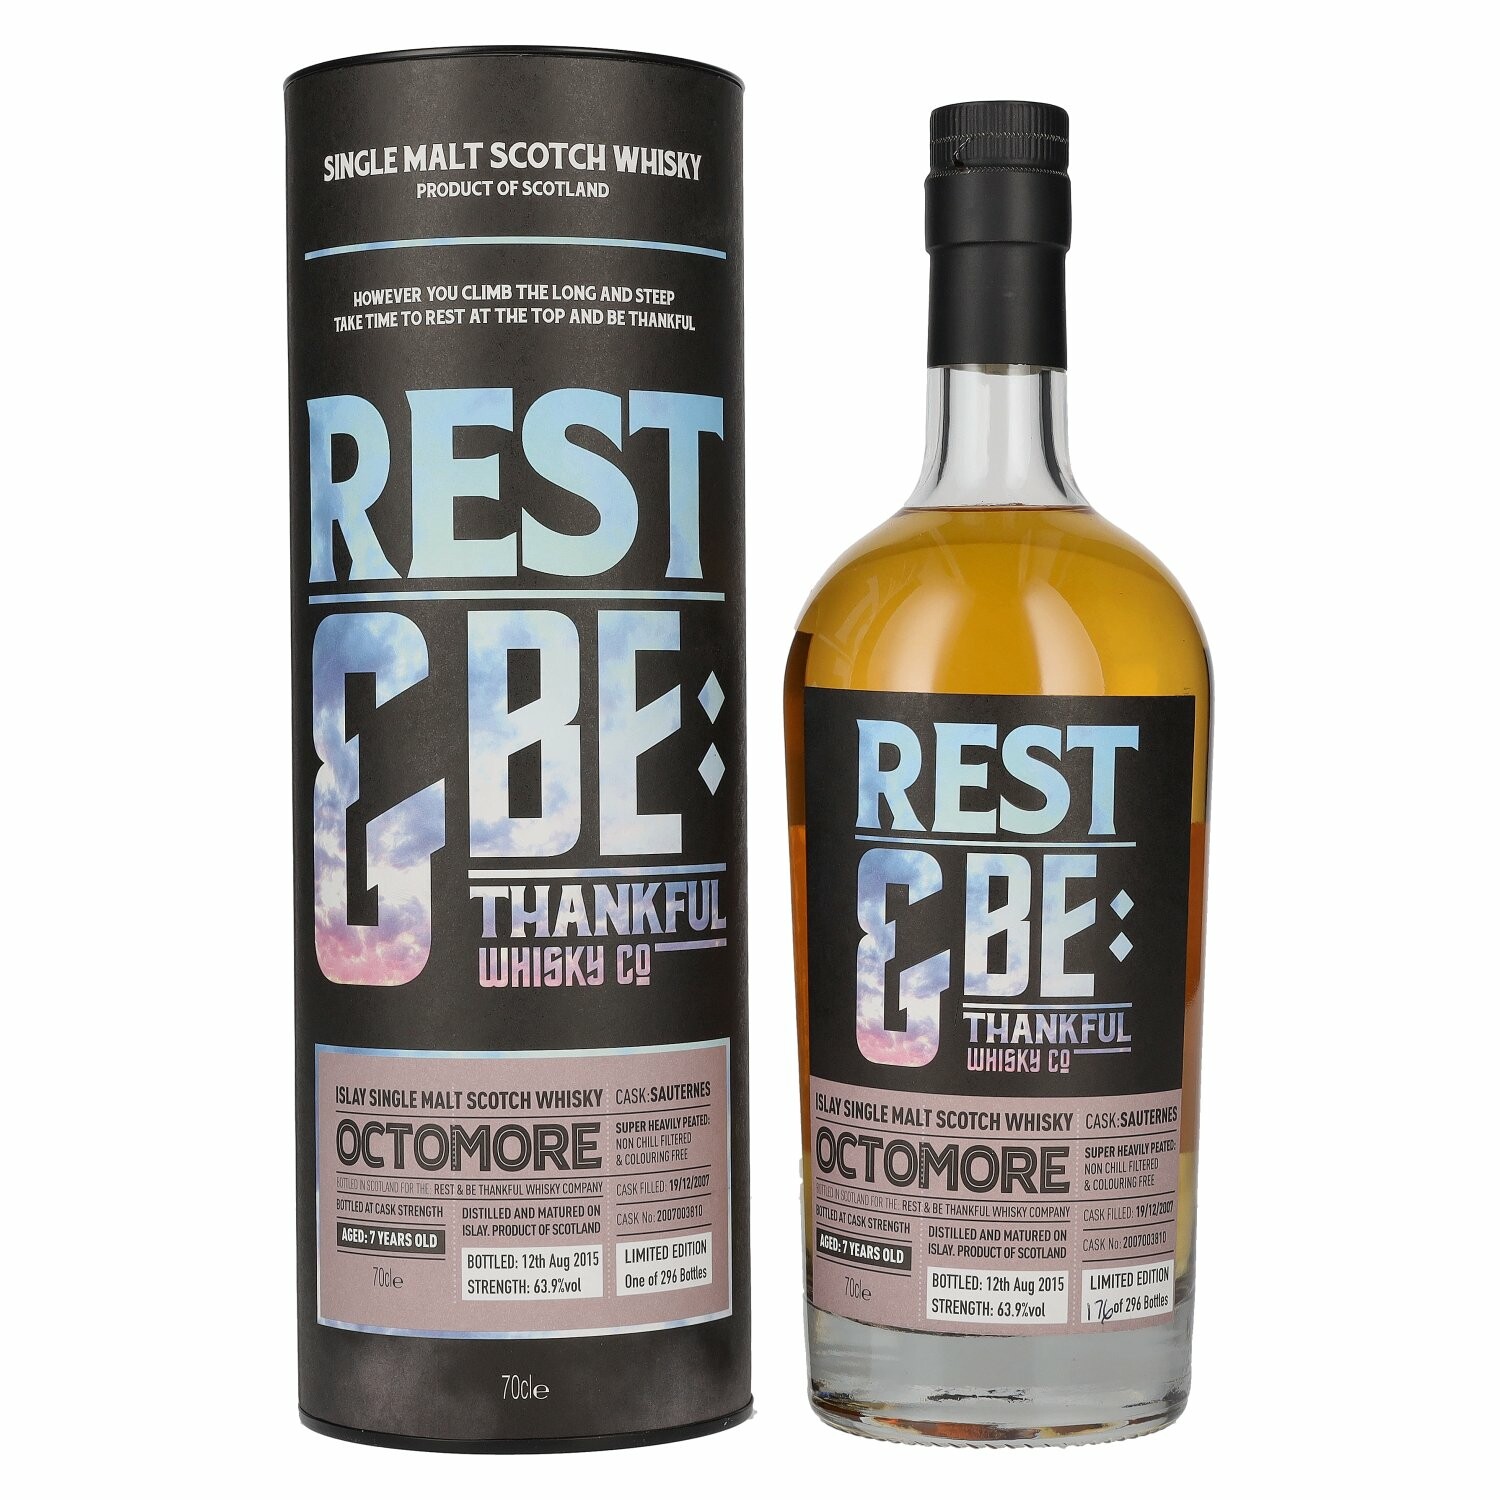 Rest & Be Thankful Octomore 7 Years Old Sauternes Cask Limited Edition 63,9% Vol. 0,7l in Giftbox